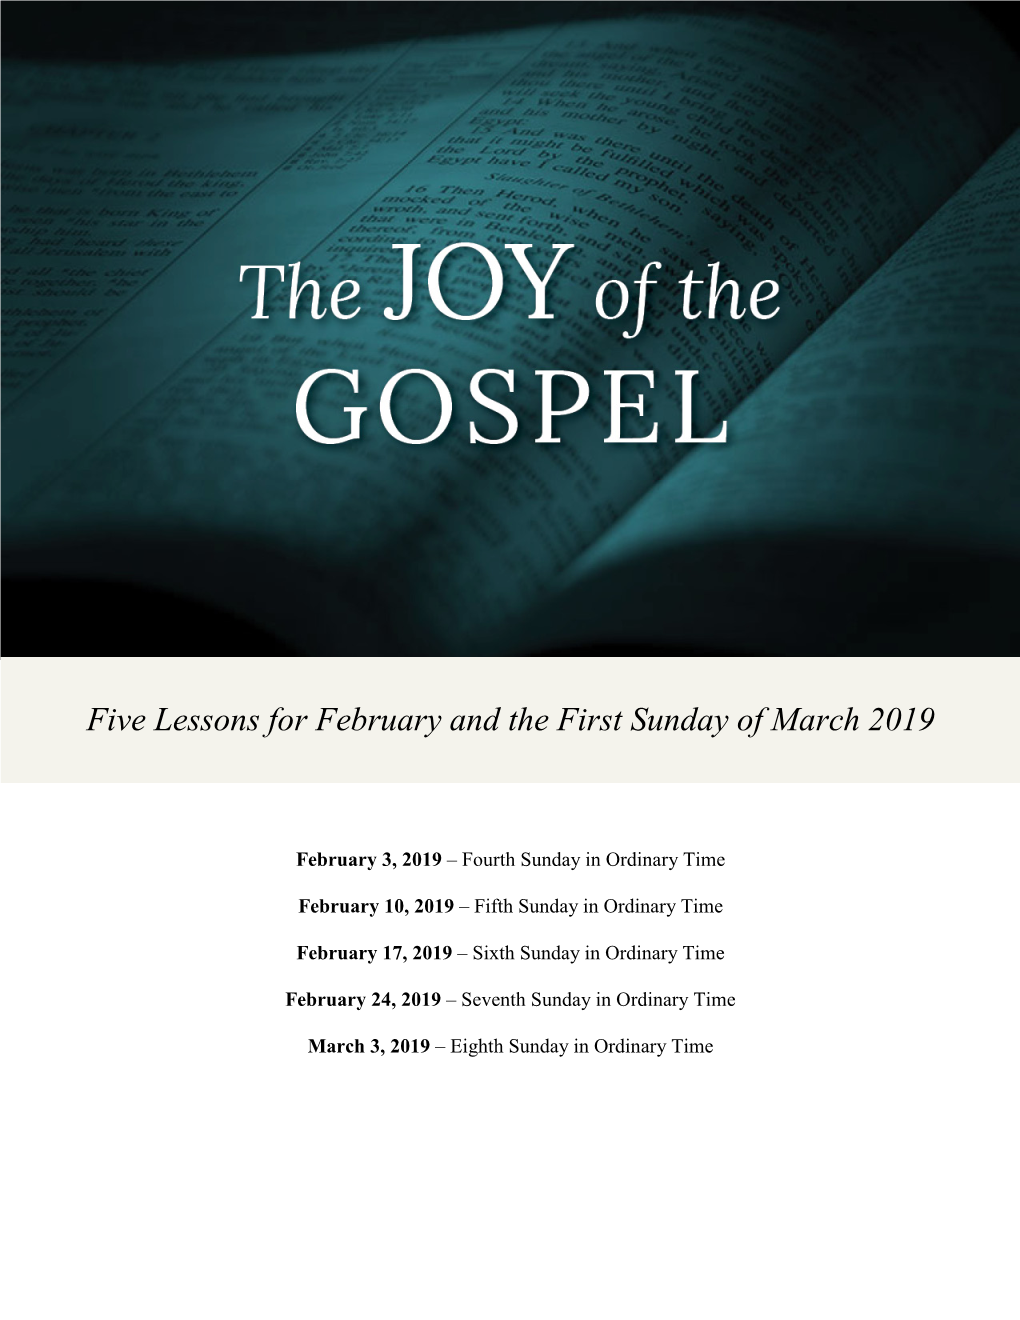 Five Lessons for February and the First Sunday of March 2019